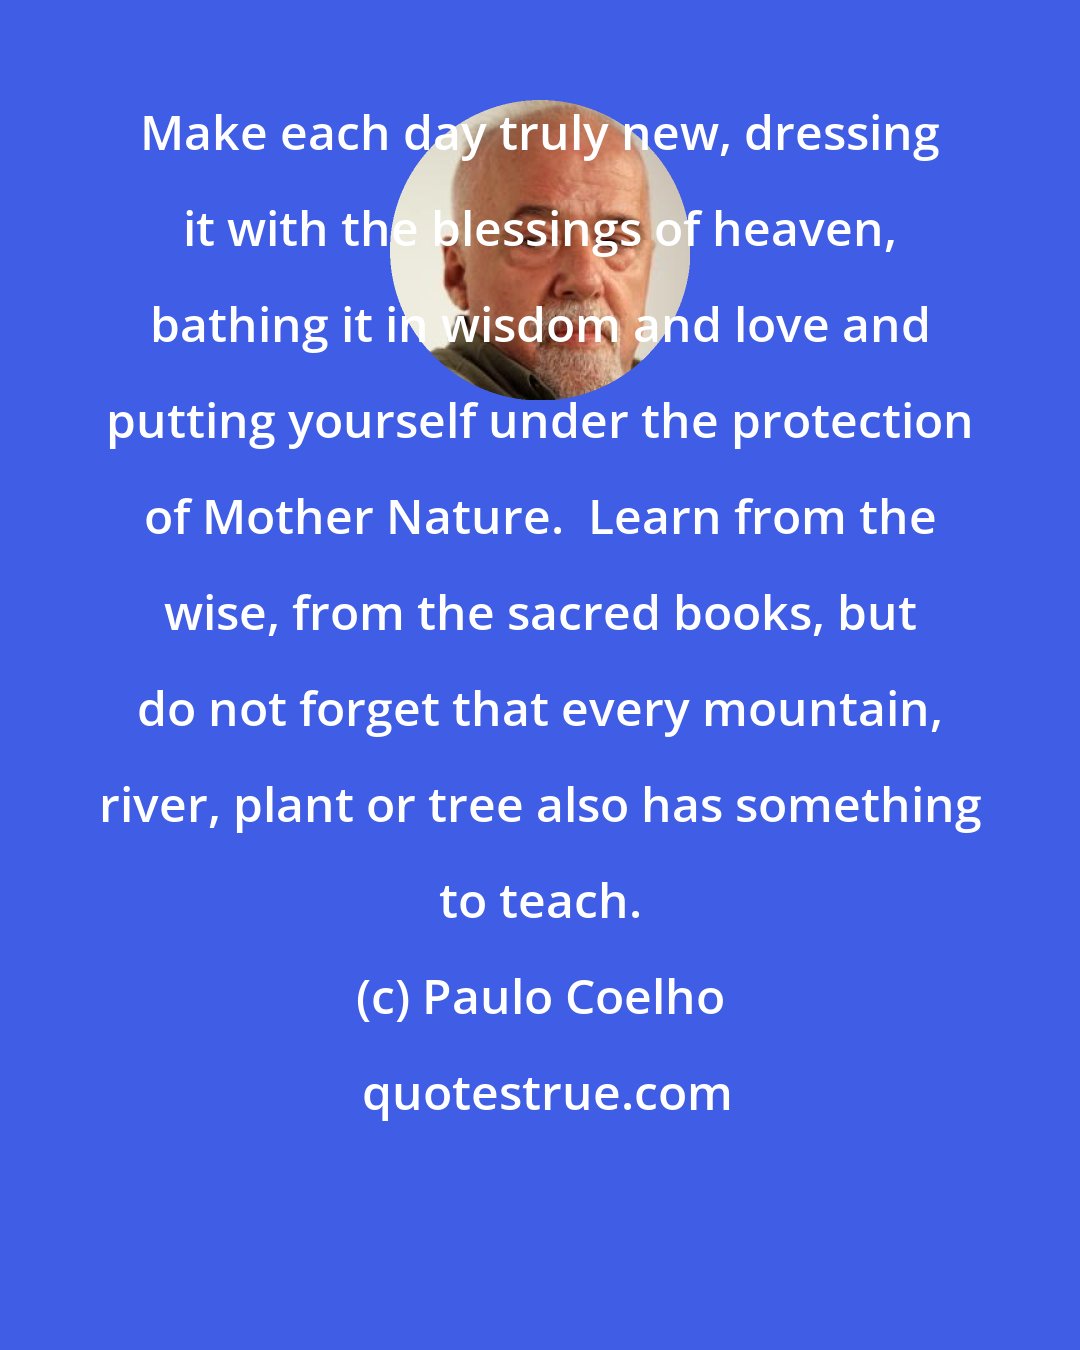 Paulo Coelho: Make each day truly new, dressing it with the blessings of heaven, bathing it in wisdom and love and putting yourself under the protection of Mother Nature.  Learn from the wise, from the sacred books, but do not forget that every mountain, river, plant or tree also has something to teach.